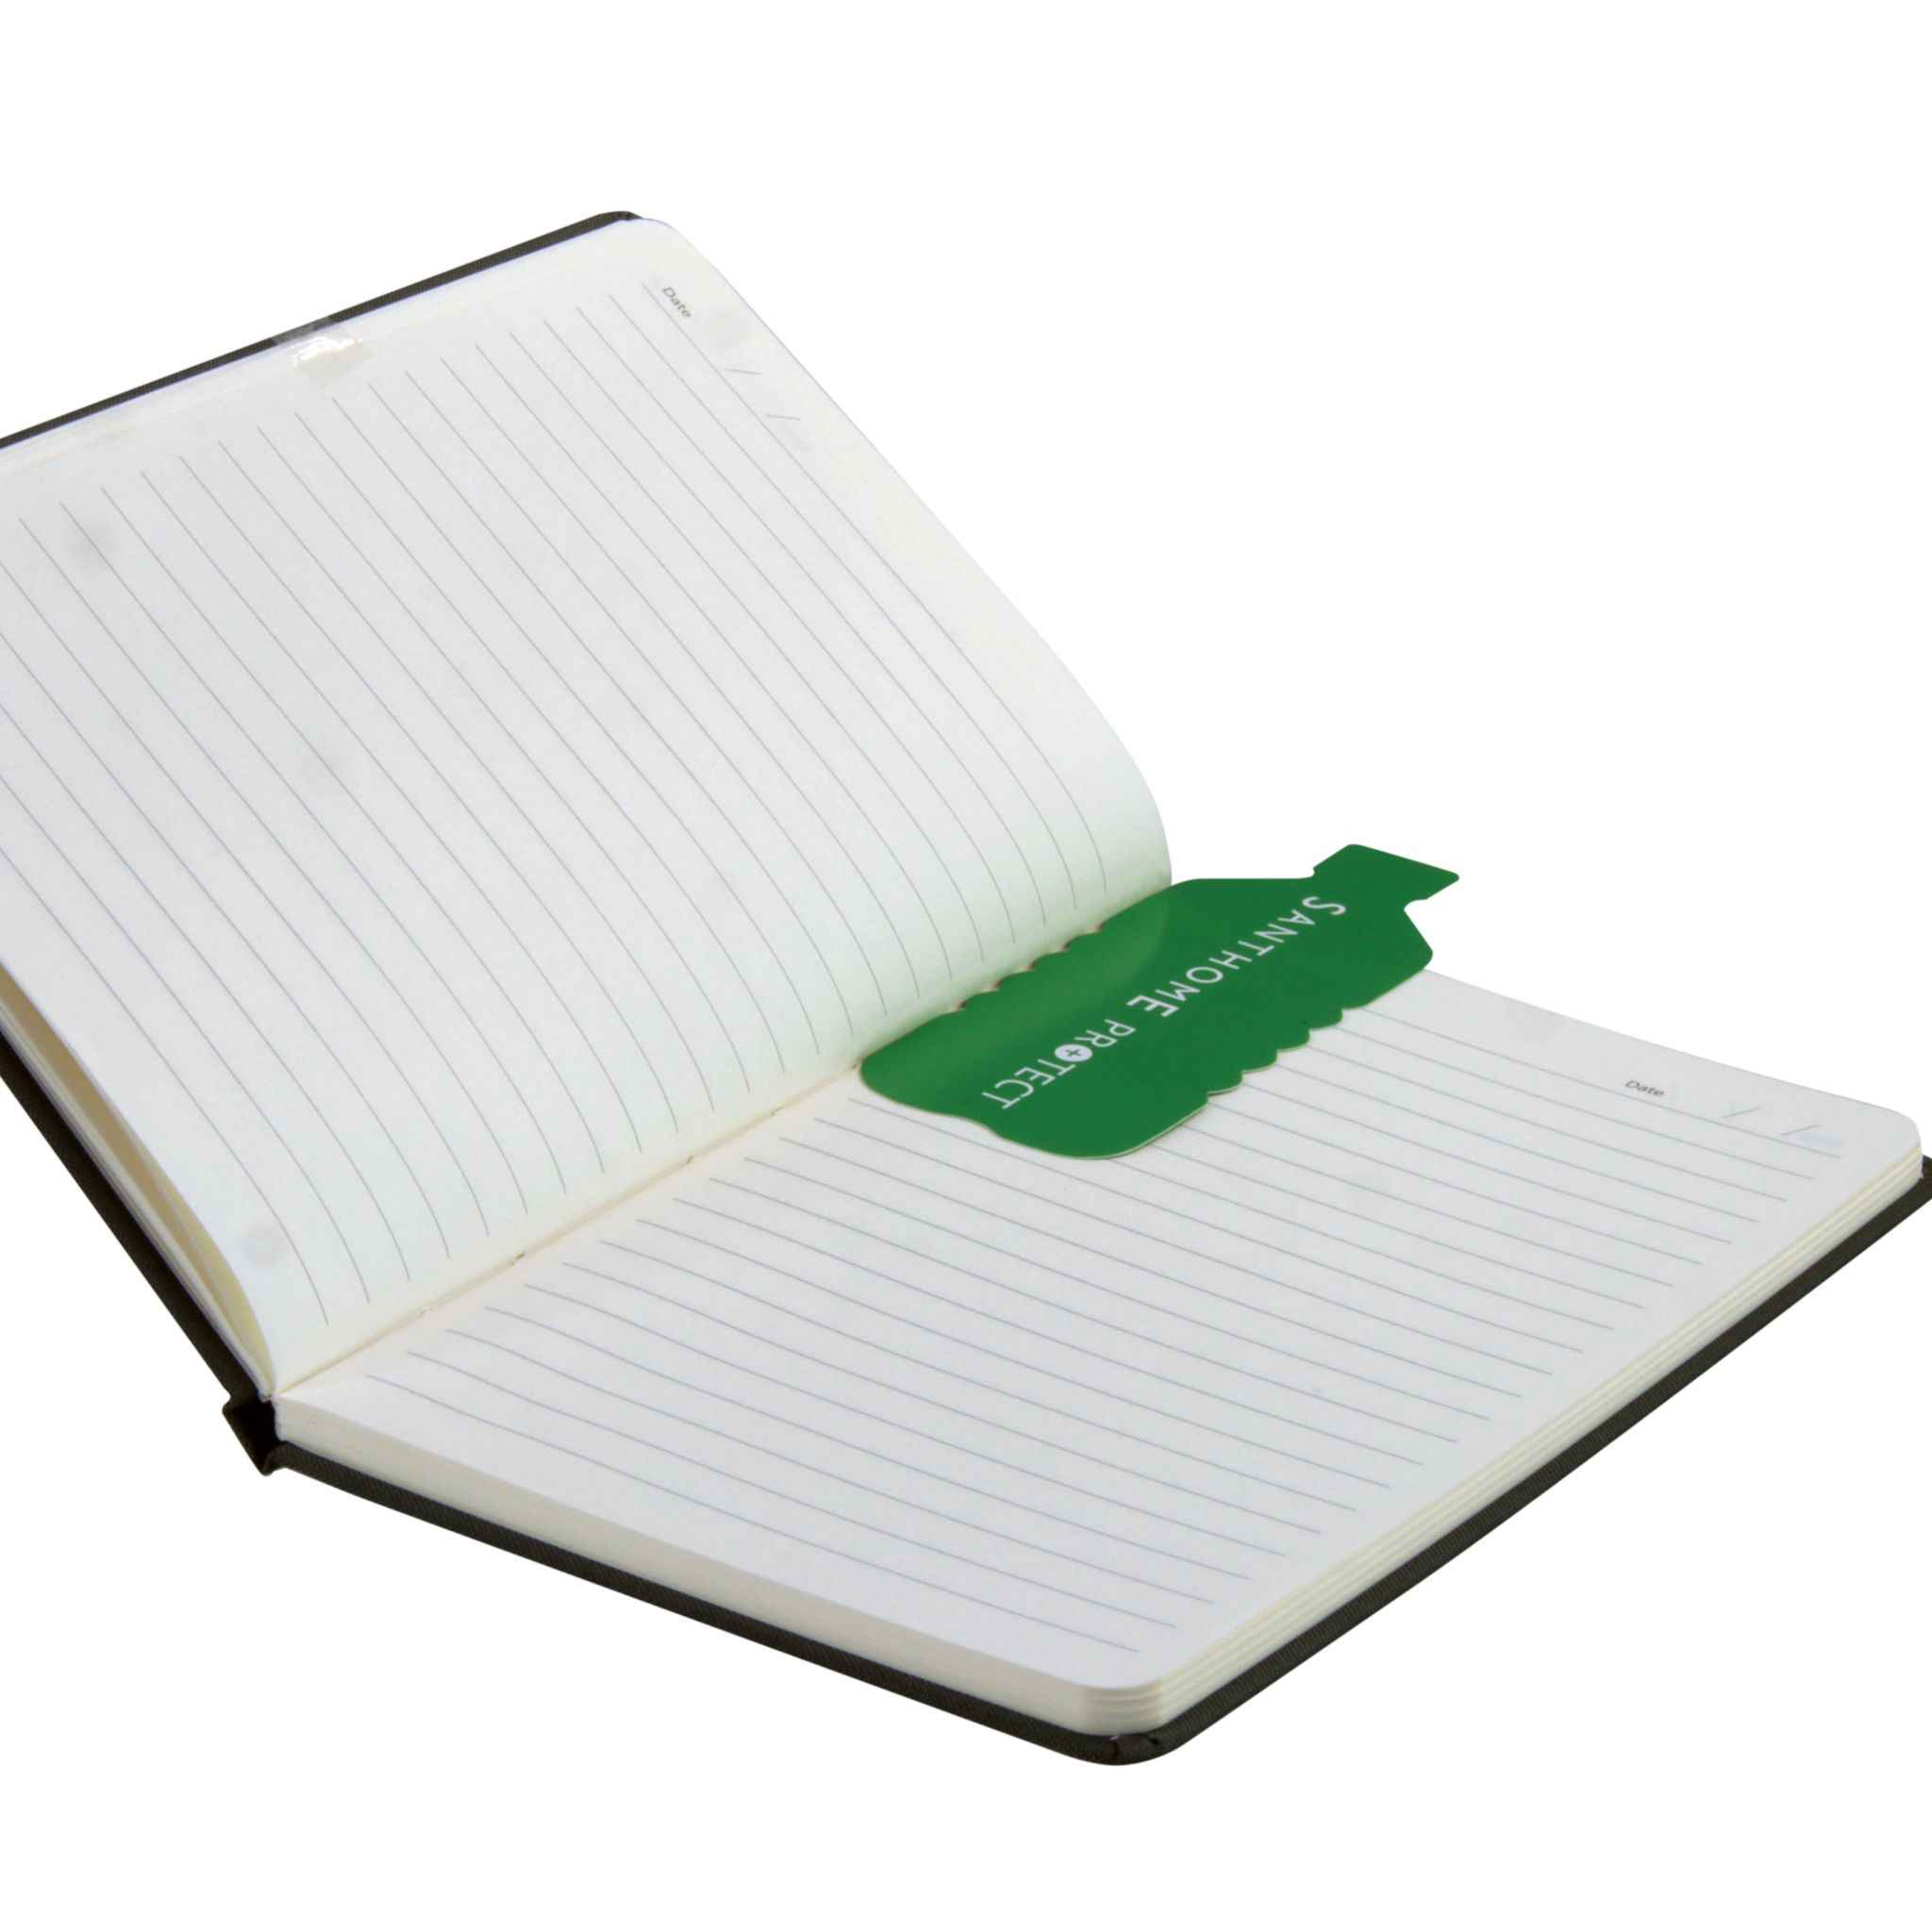 Anti-Microbial Notebook showing the bookmark